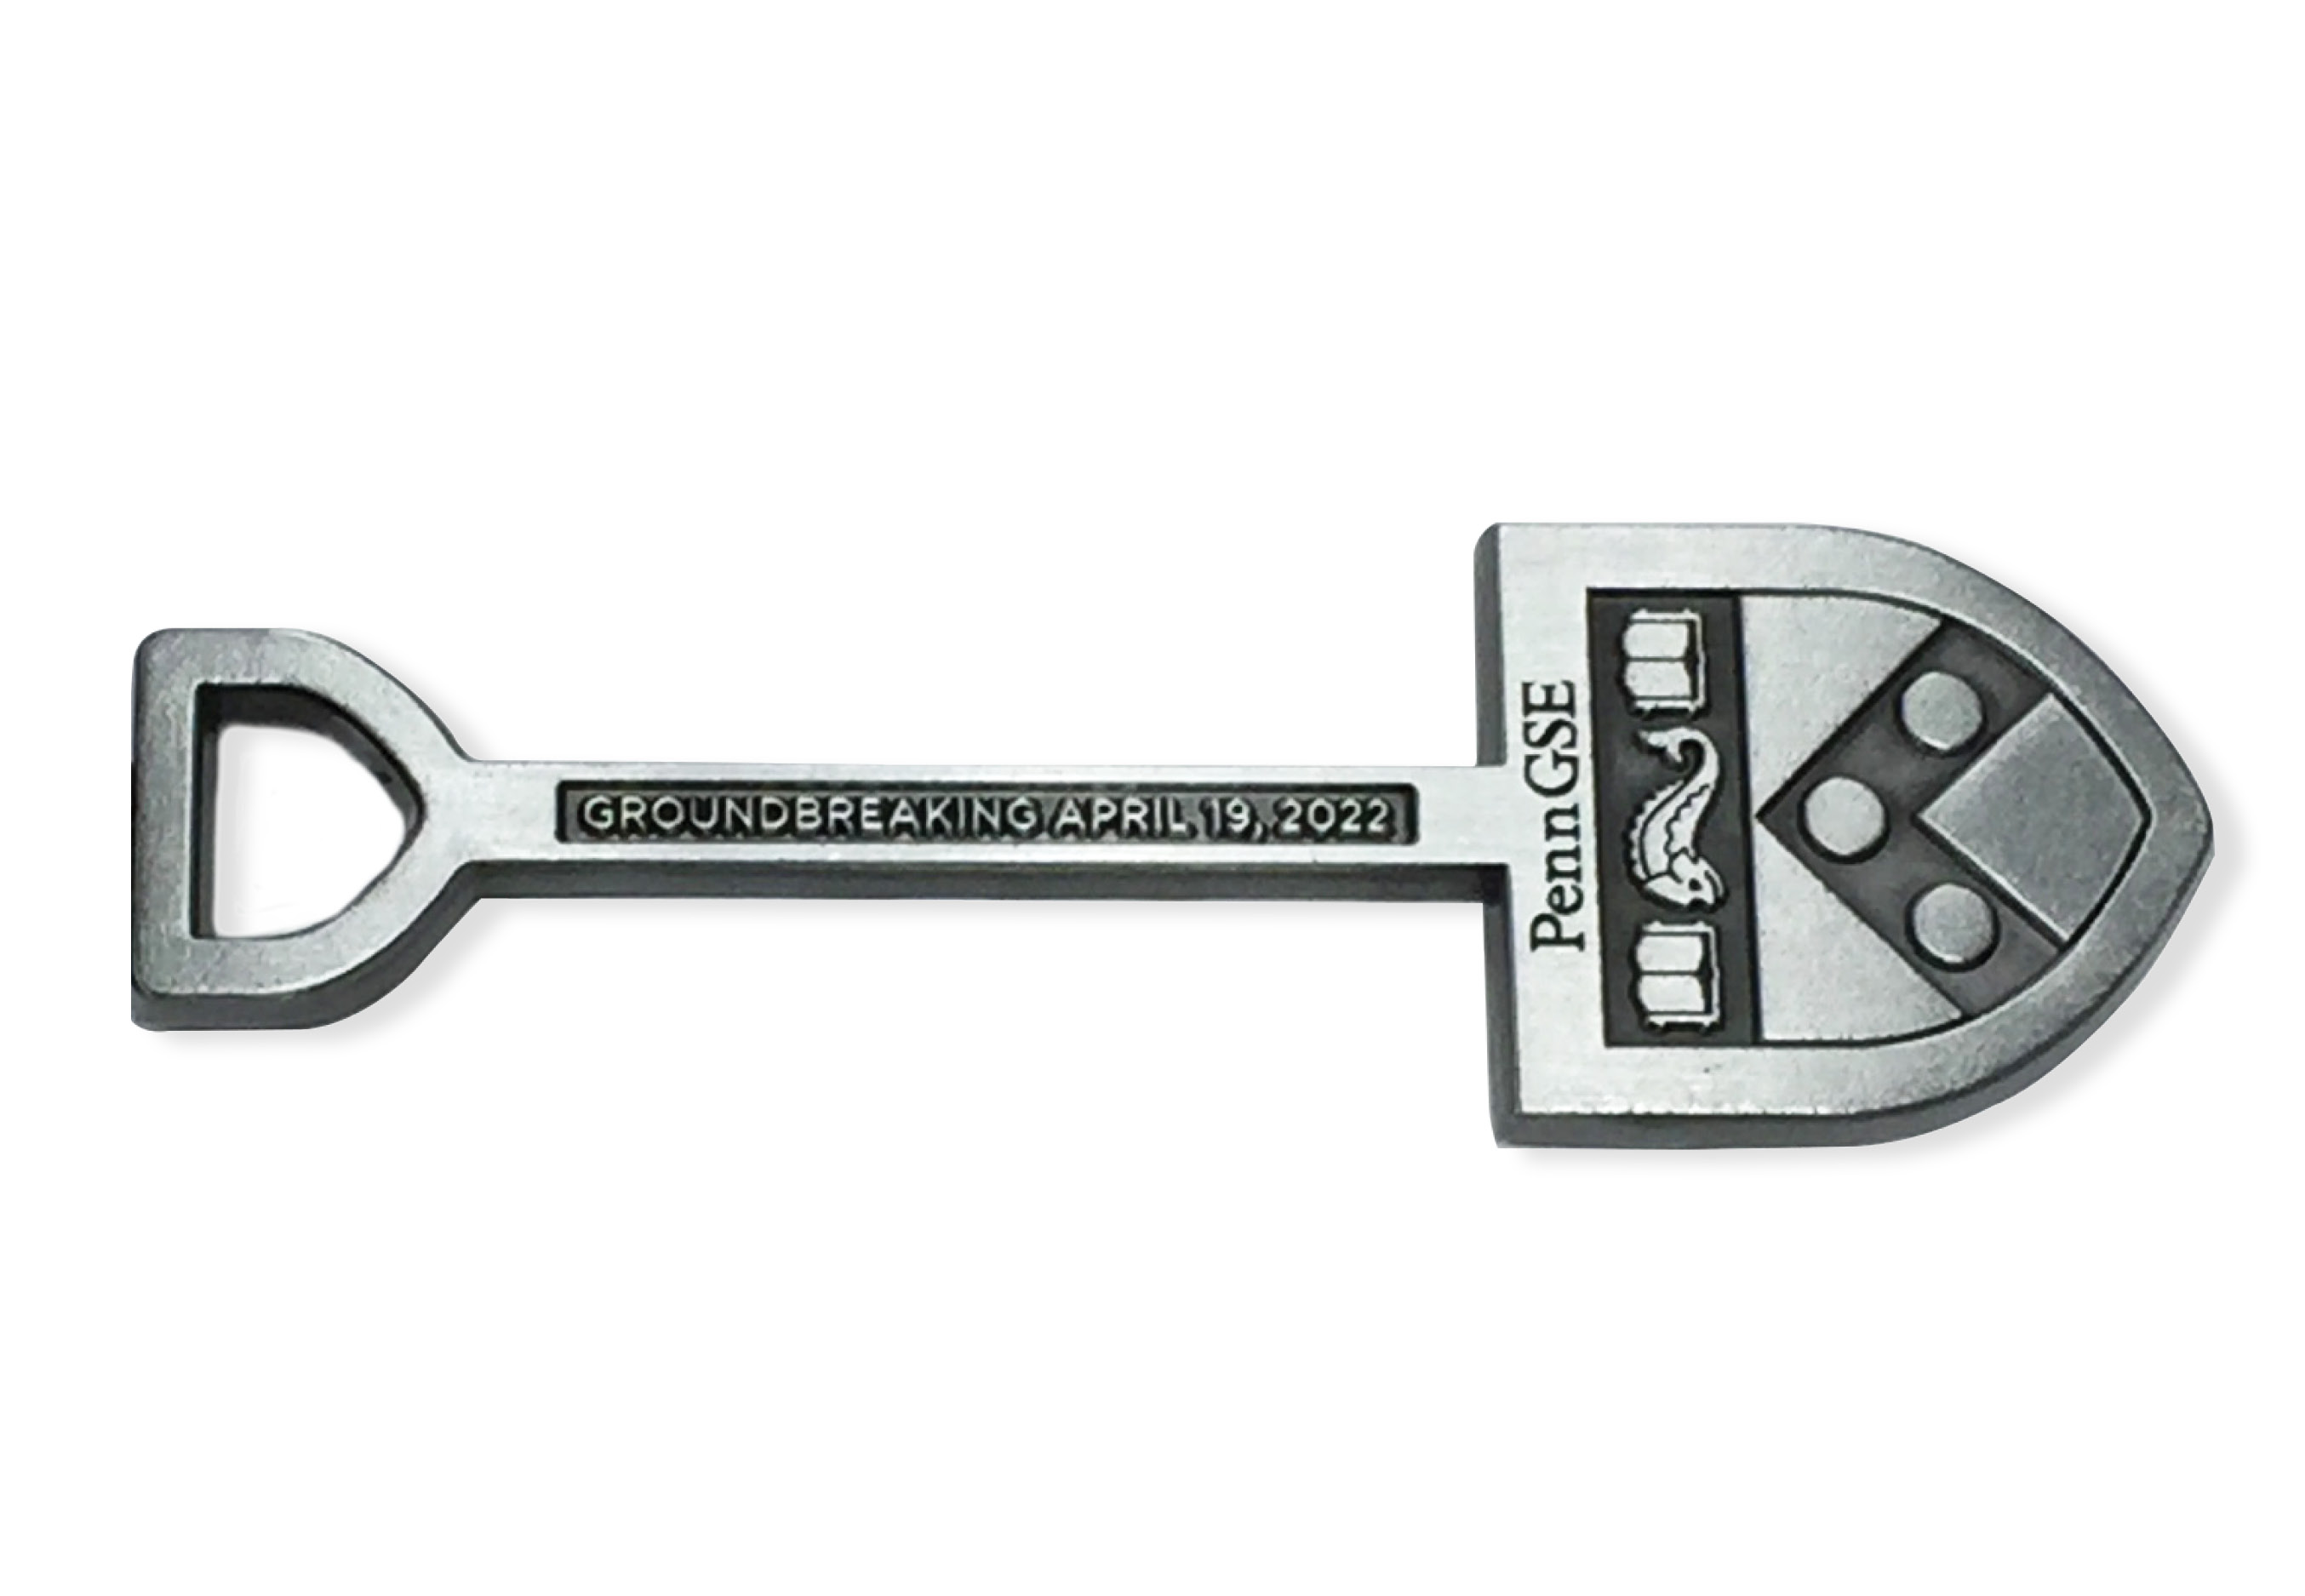 A silver keychain fob in the shape of a shovel has the Penn shield and “Penn GSE” on the spade and “Groundbreaking April 19, 2022” on the handle.